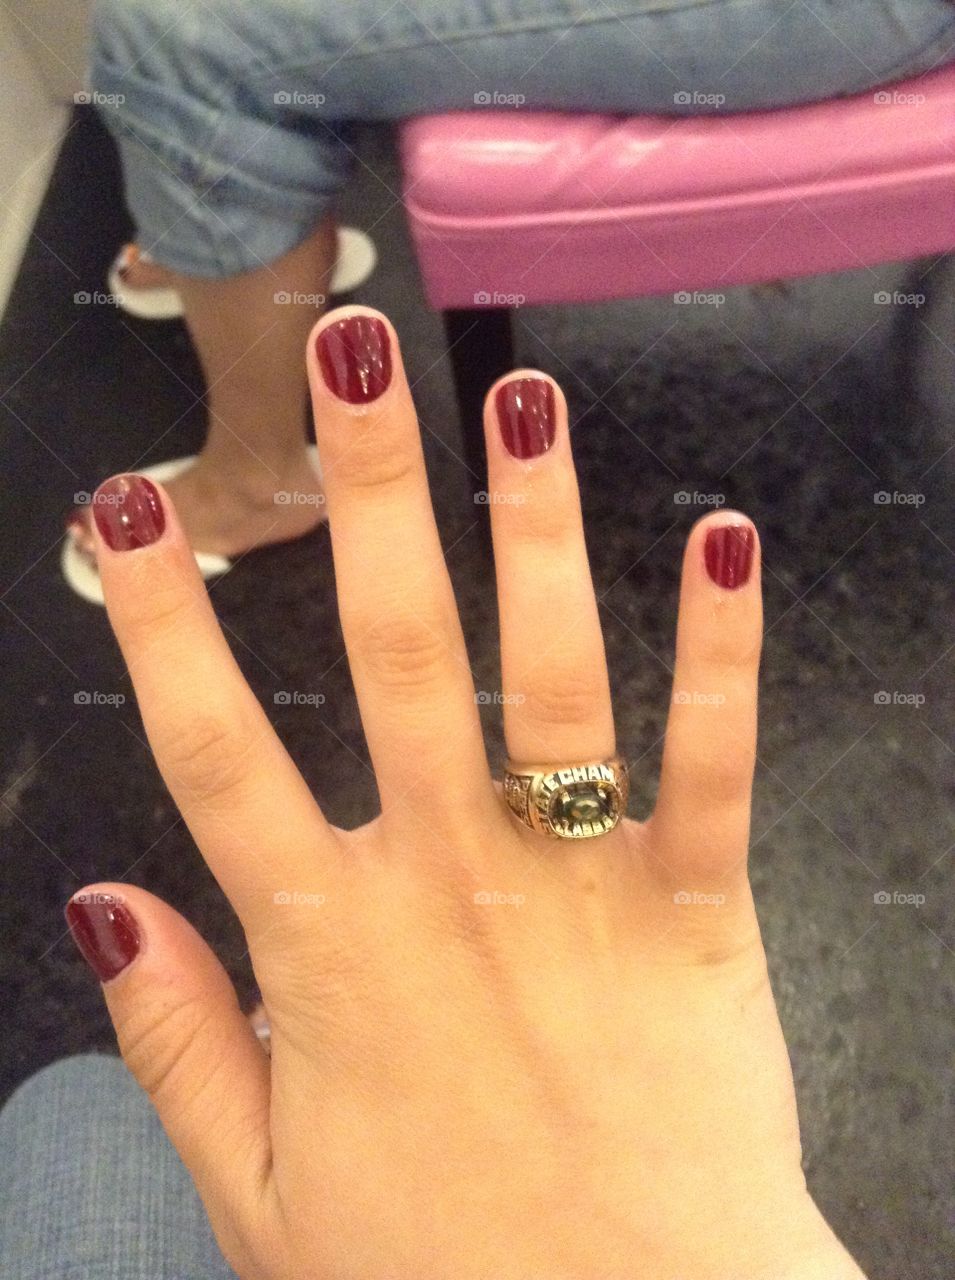 I went with my mother and godmother to get a manicure and pedicure:) 